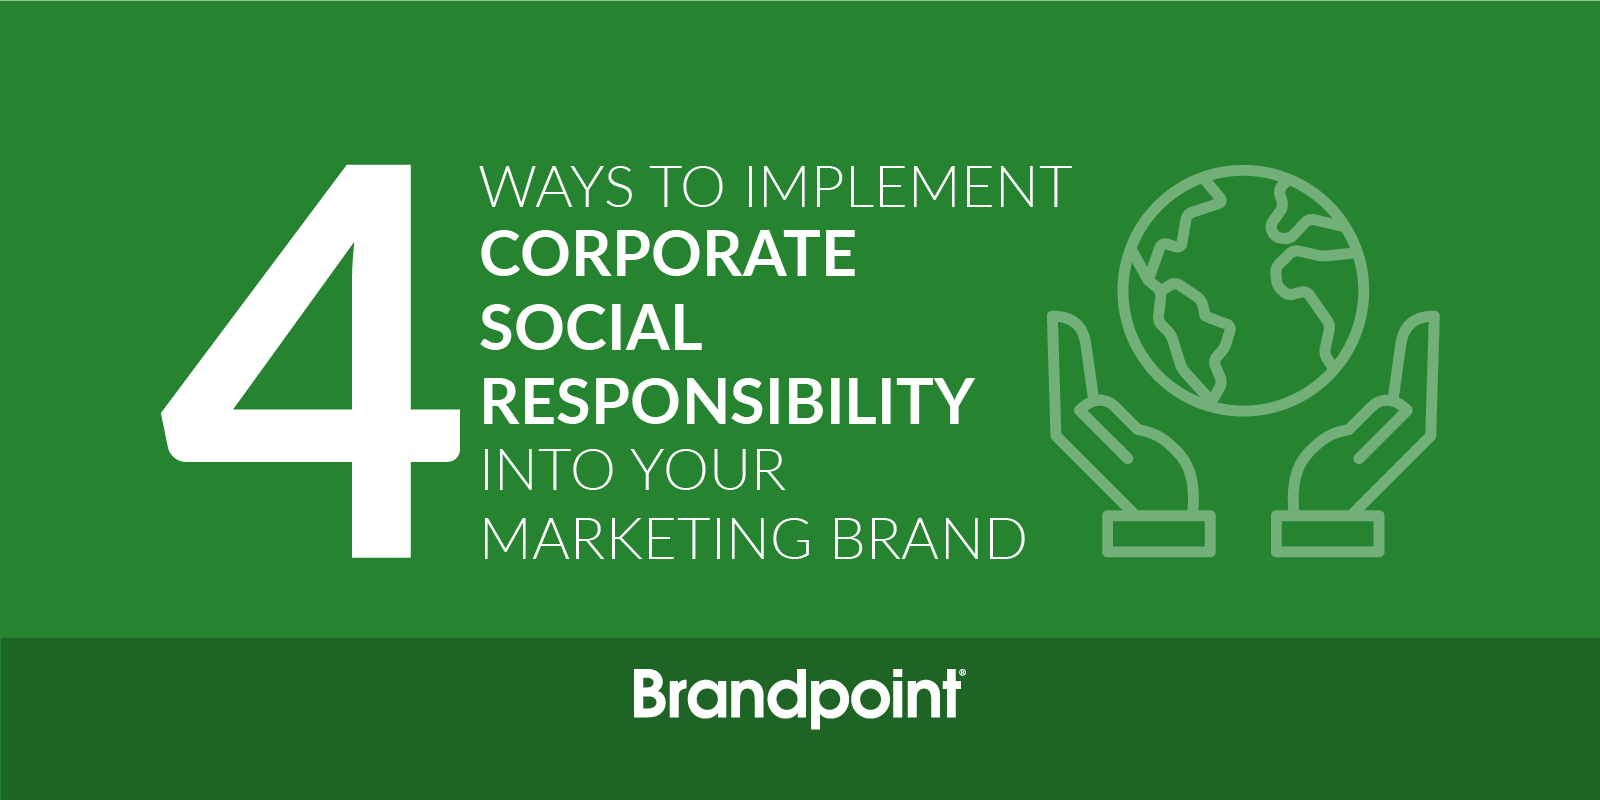 Ways to Implement Corporate Social Responsibility into Your Marketing | Brandpoint